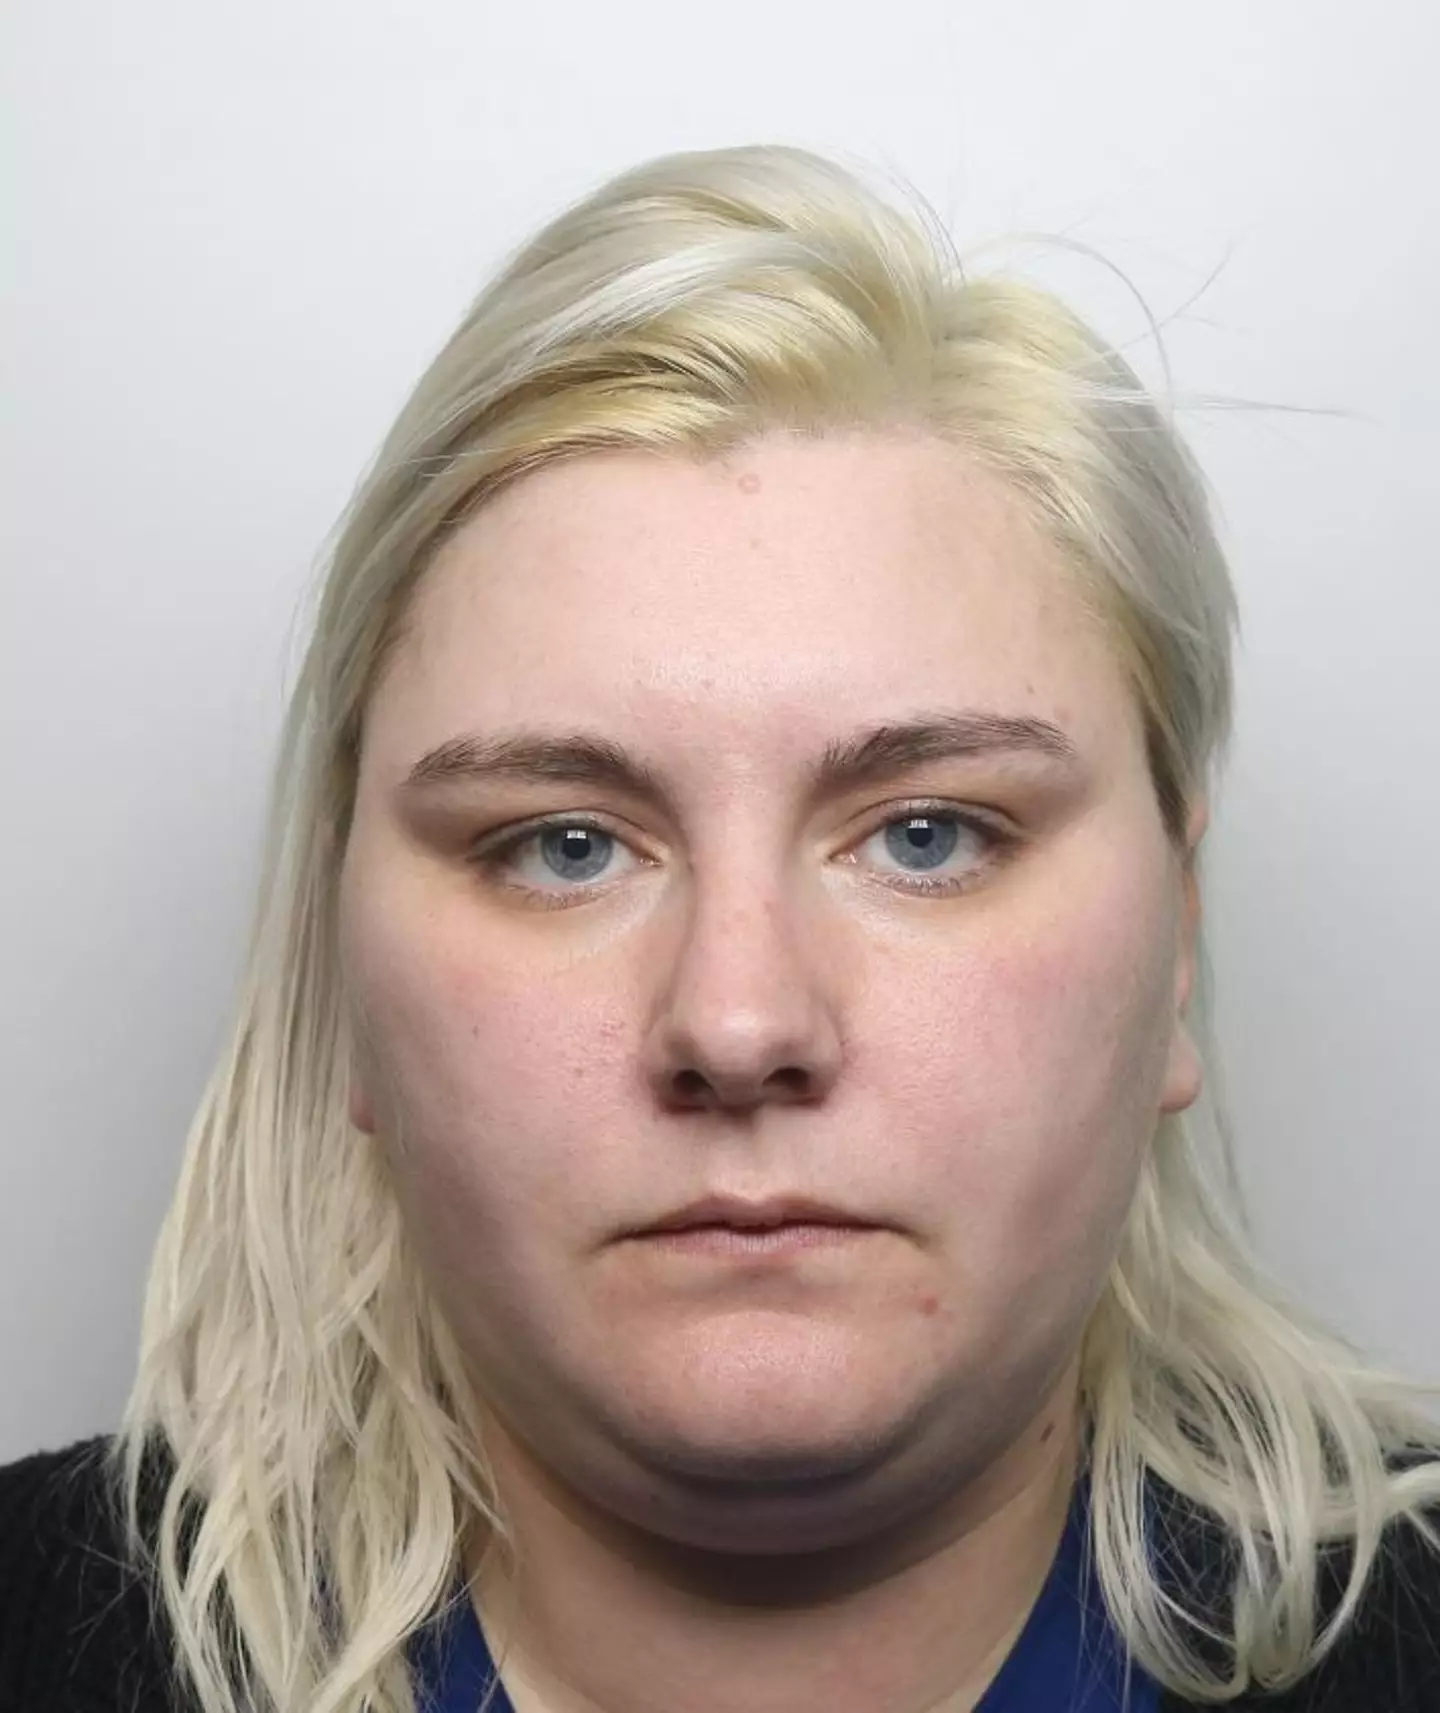 Gemma Barton was found guilty of causing or allowing a child to die and two counts of child cruelty.